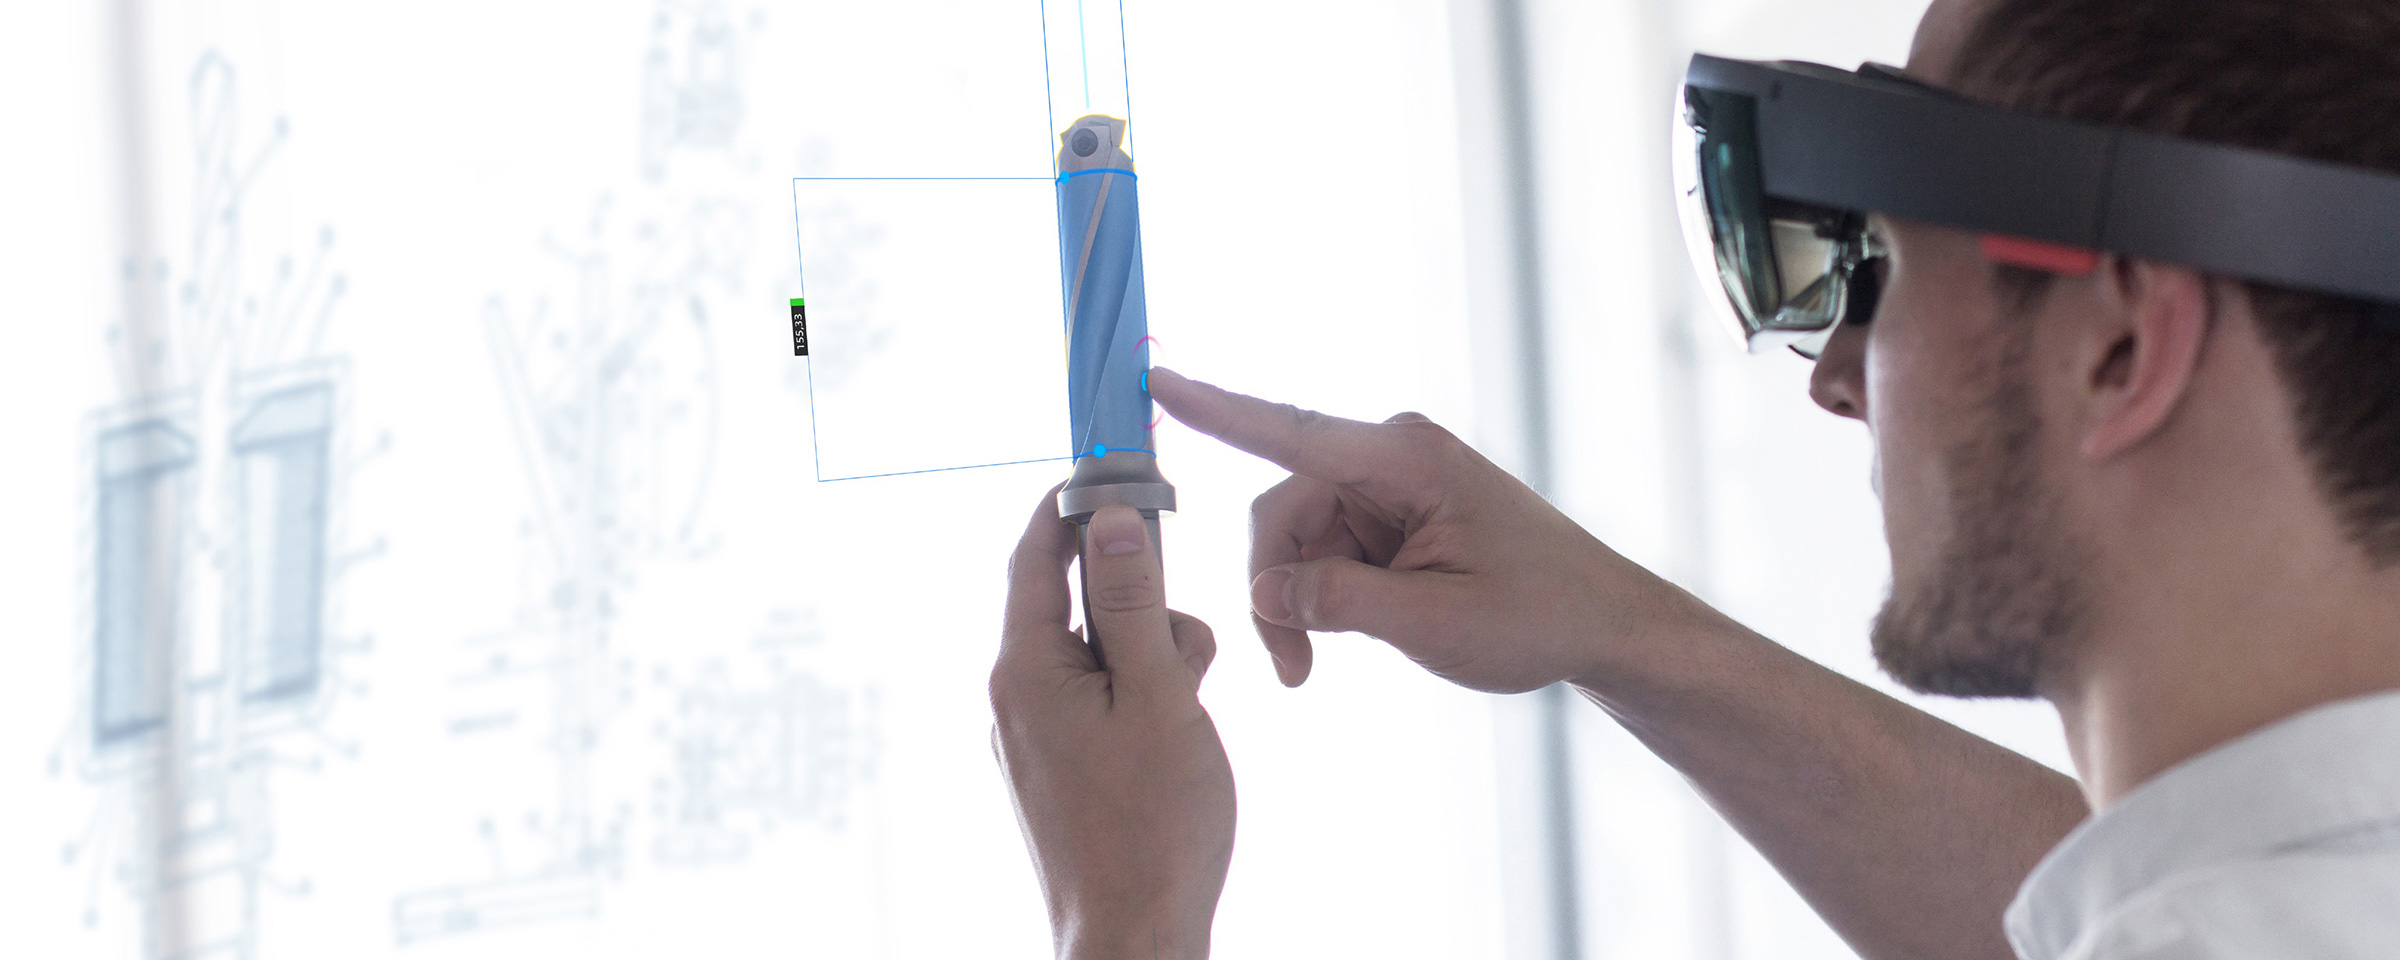 A person receives information about a workpiece through the tool of Augmented Reality